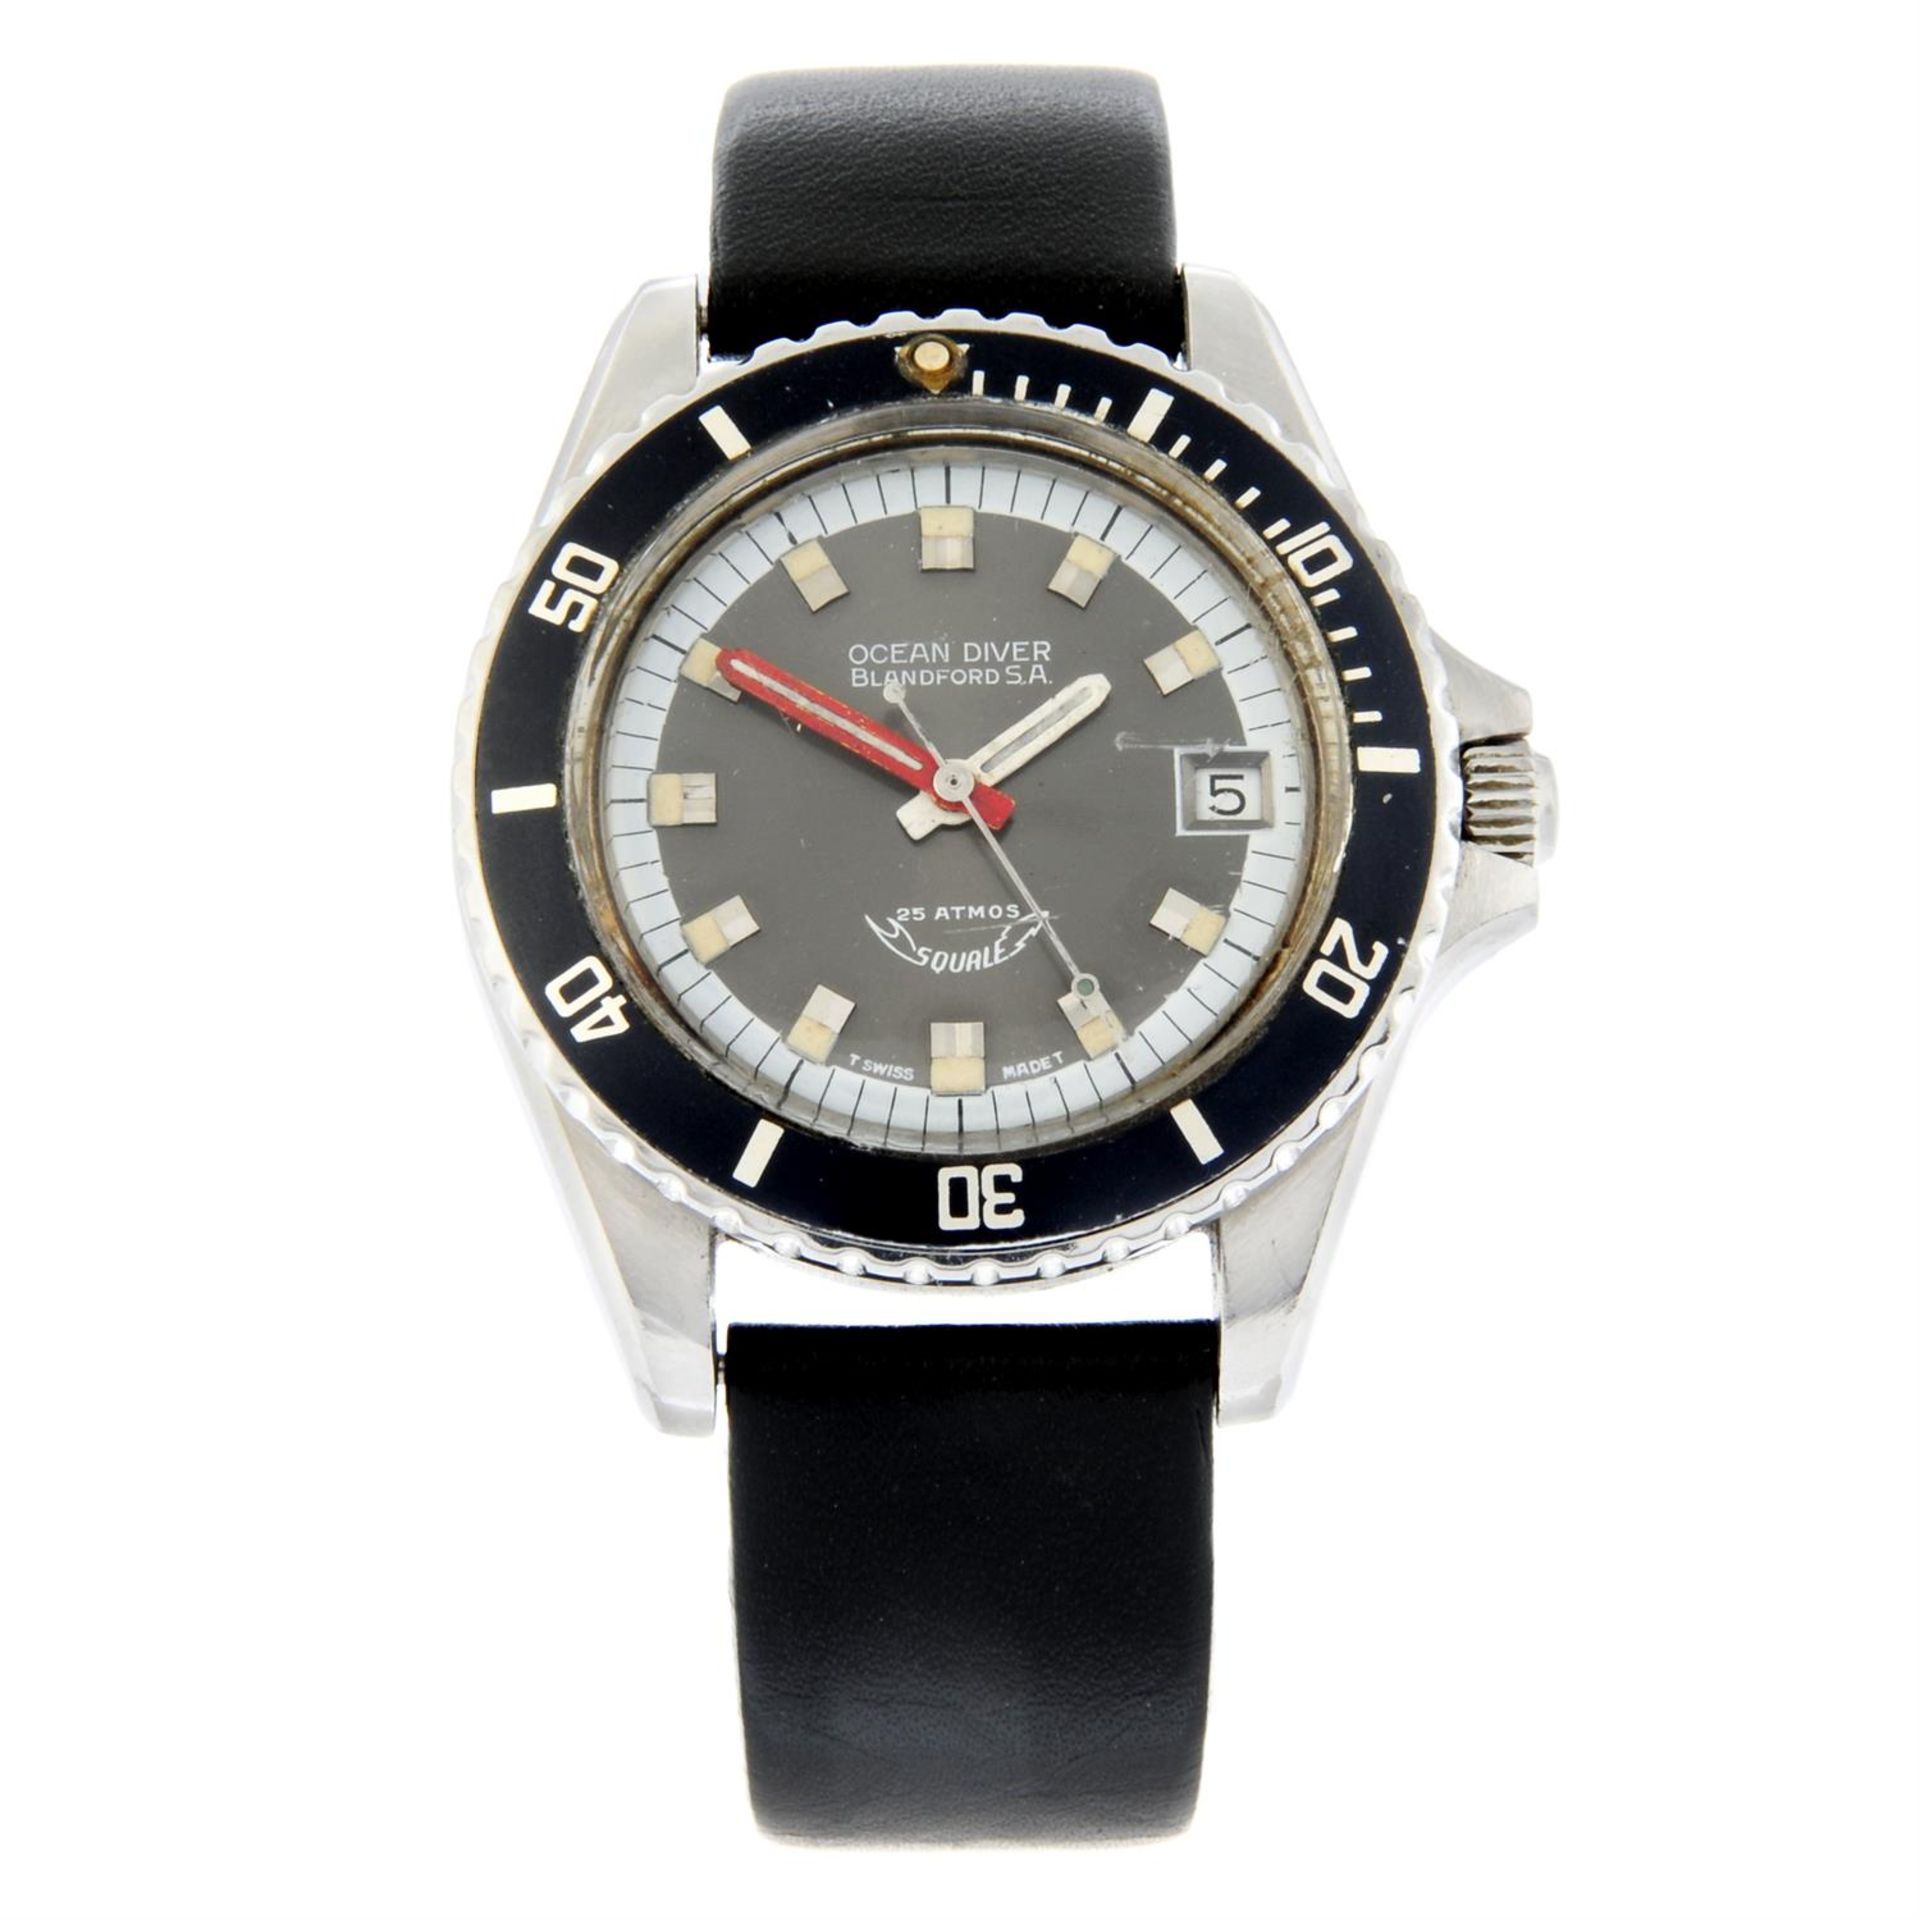 Squale - an Ocean Diver watch, 37mm.